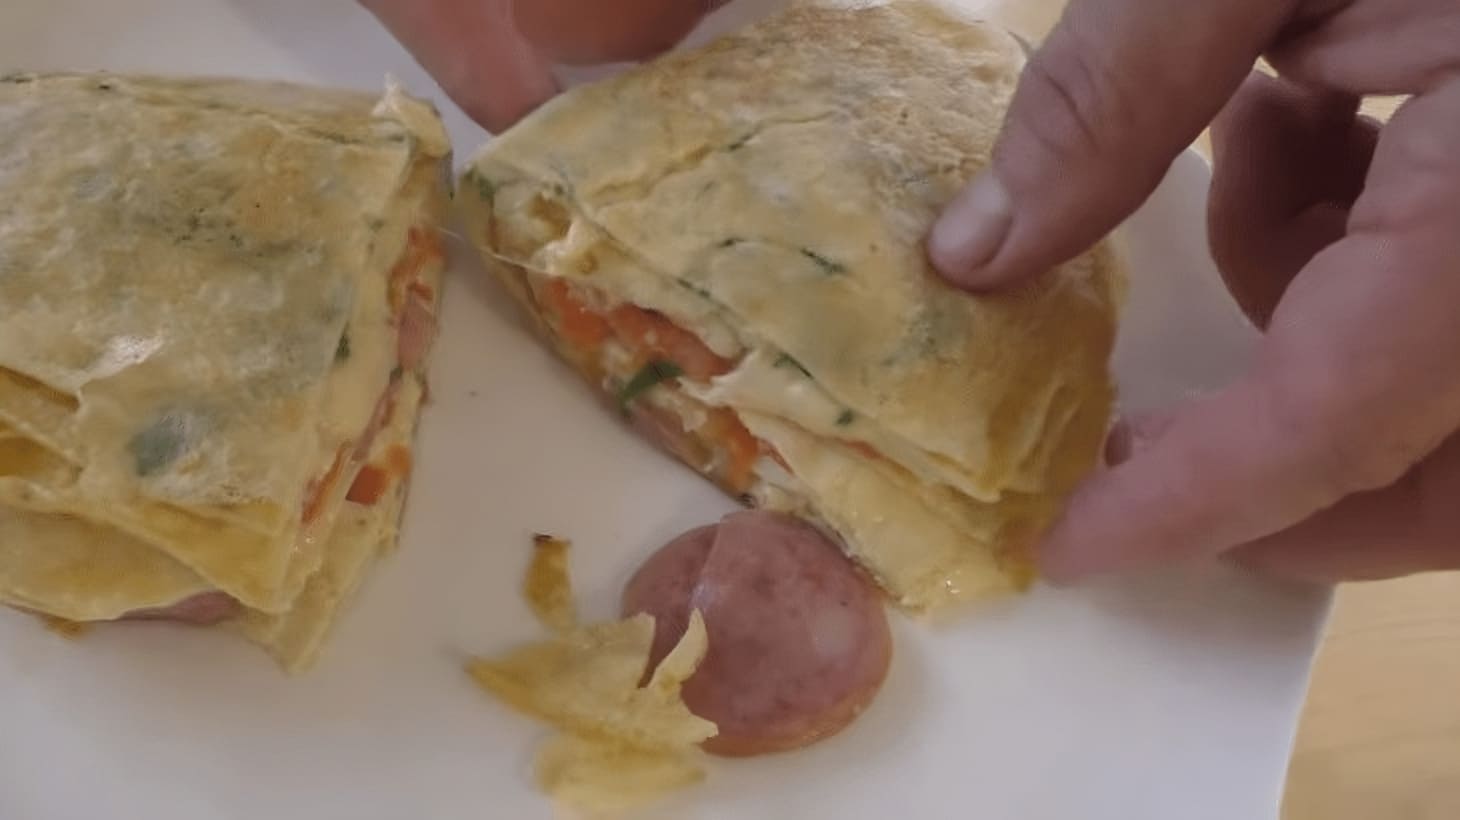 Delicious Layered Omelette in 5 Minutes